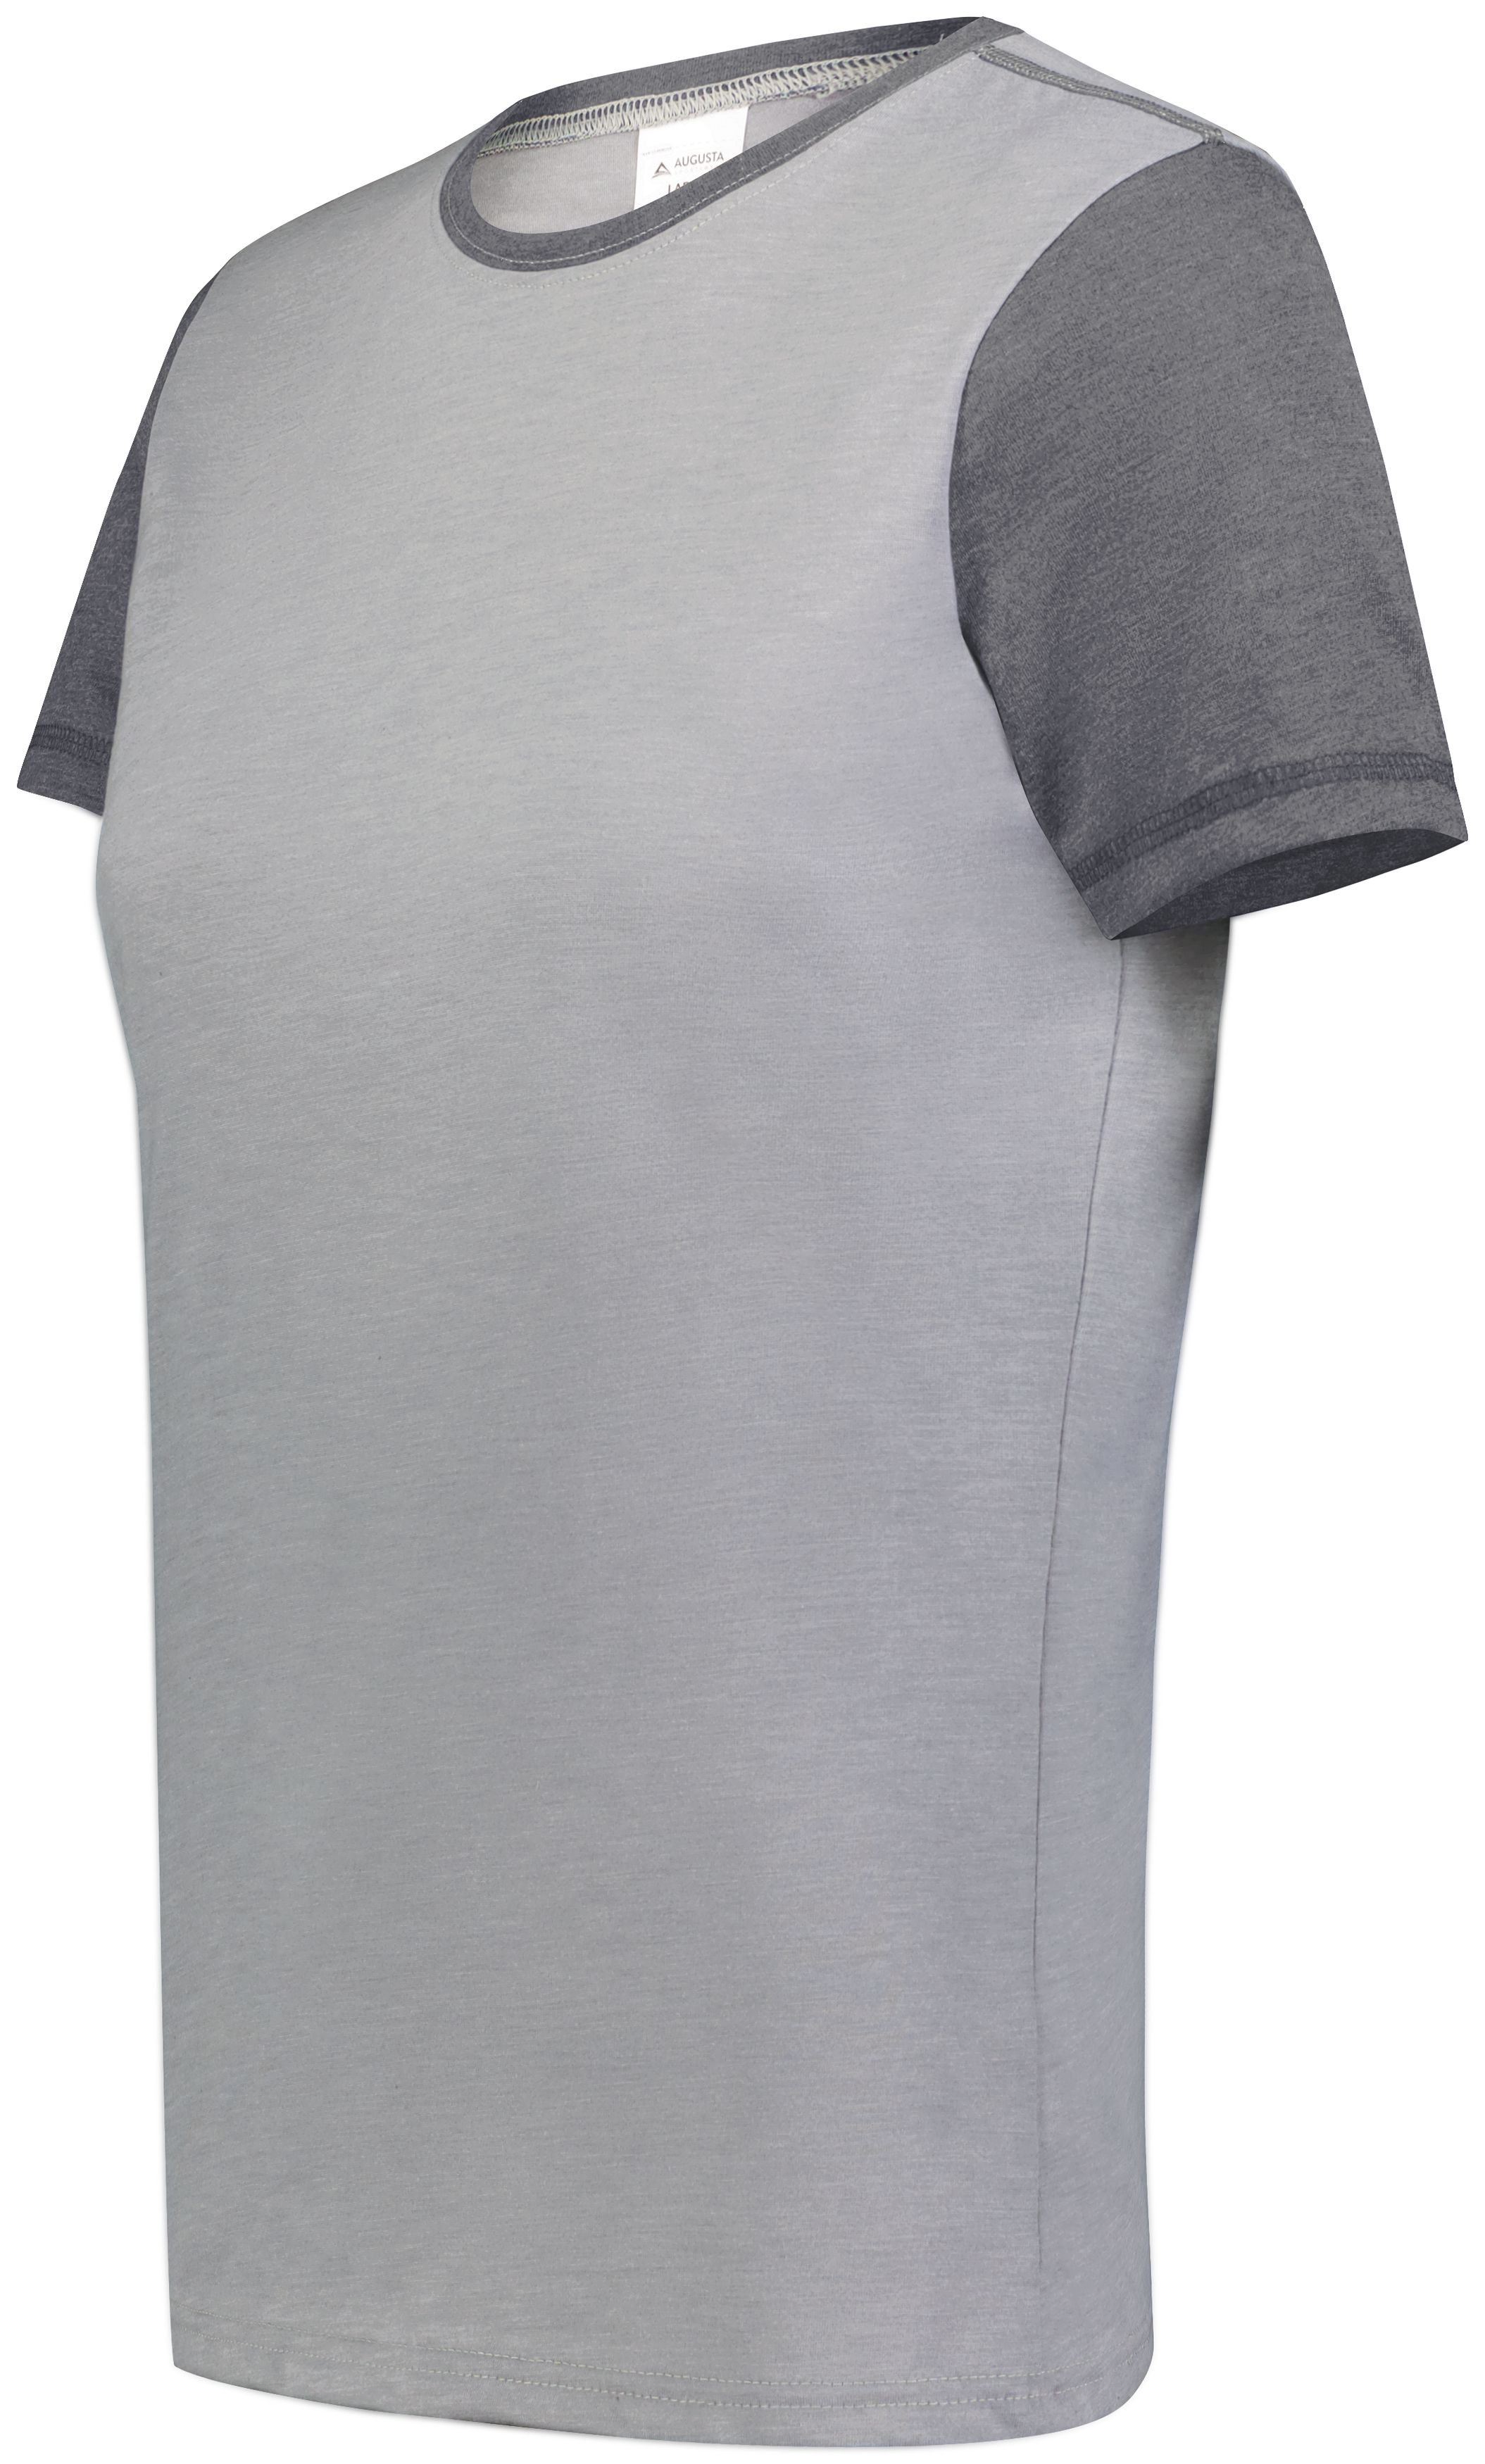 click to view Grey Heather/Carbon Heather